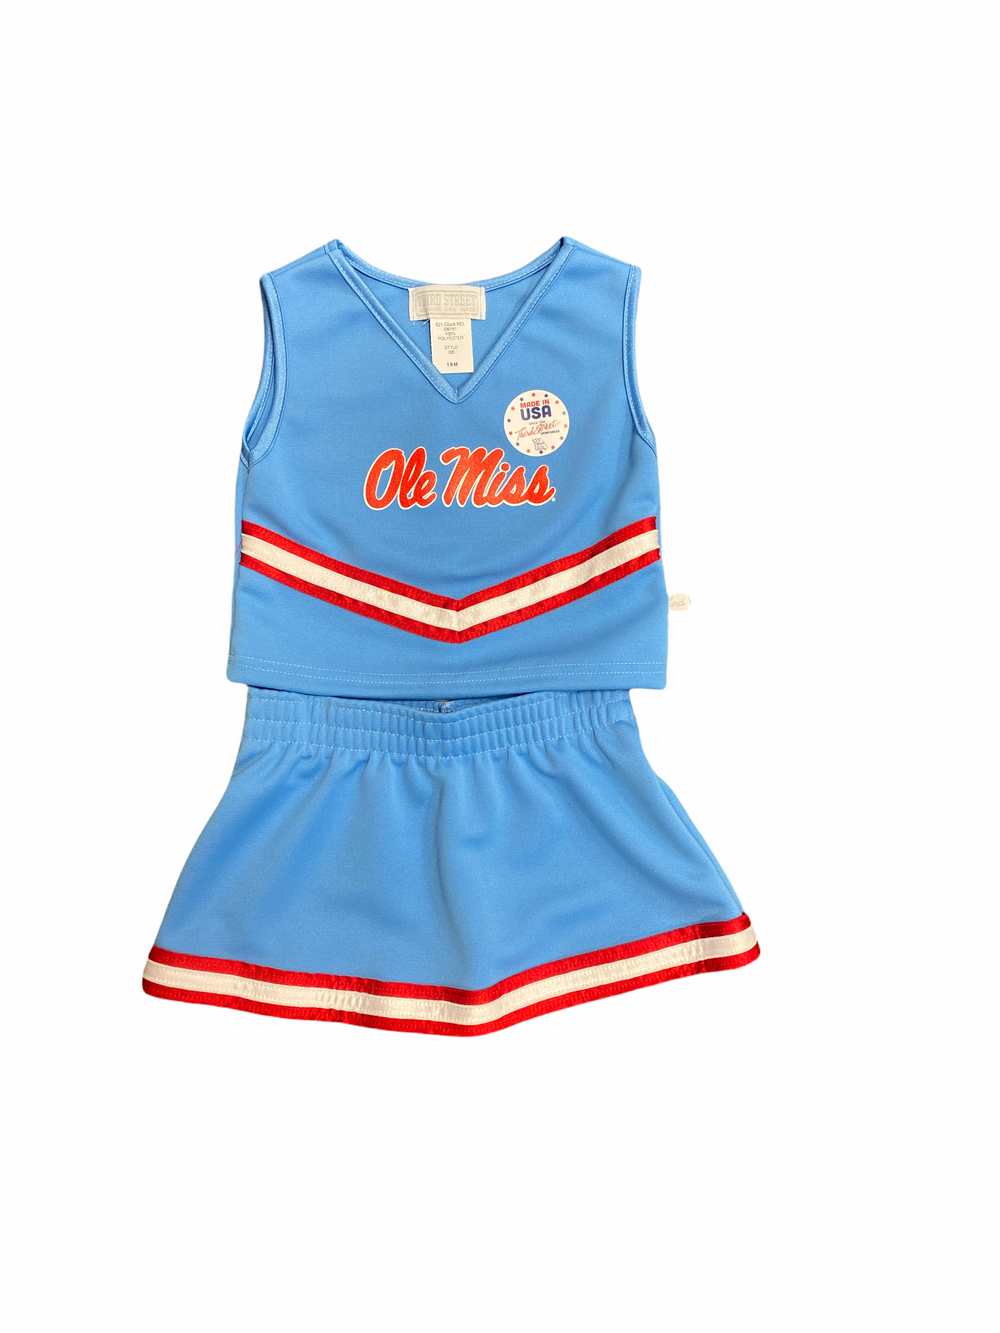 Third Street Ole Miss Powder Blue Cheer Outfit for Kids – The College Corner